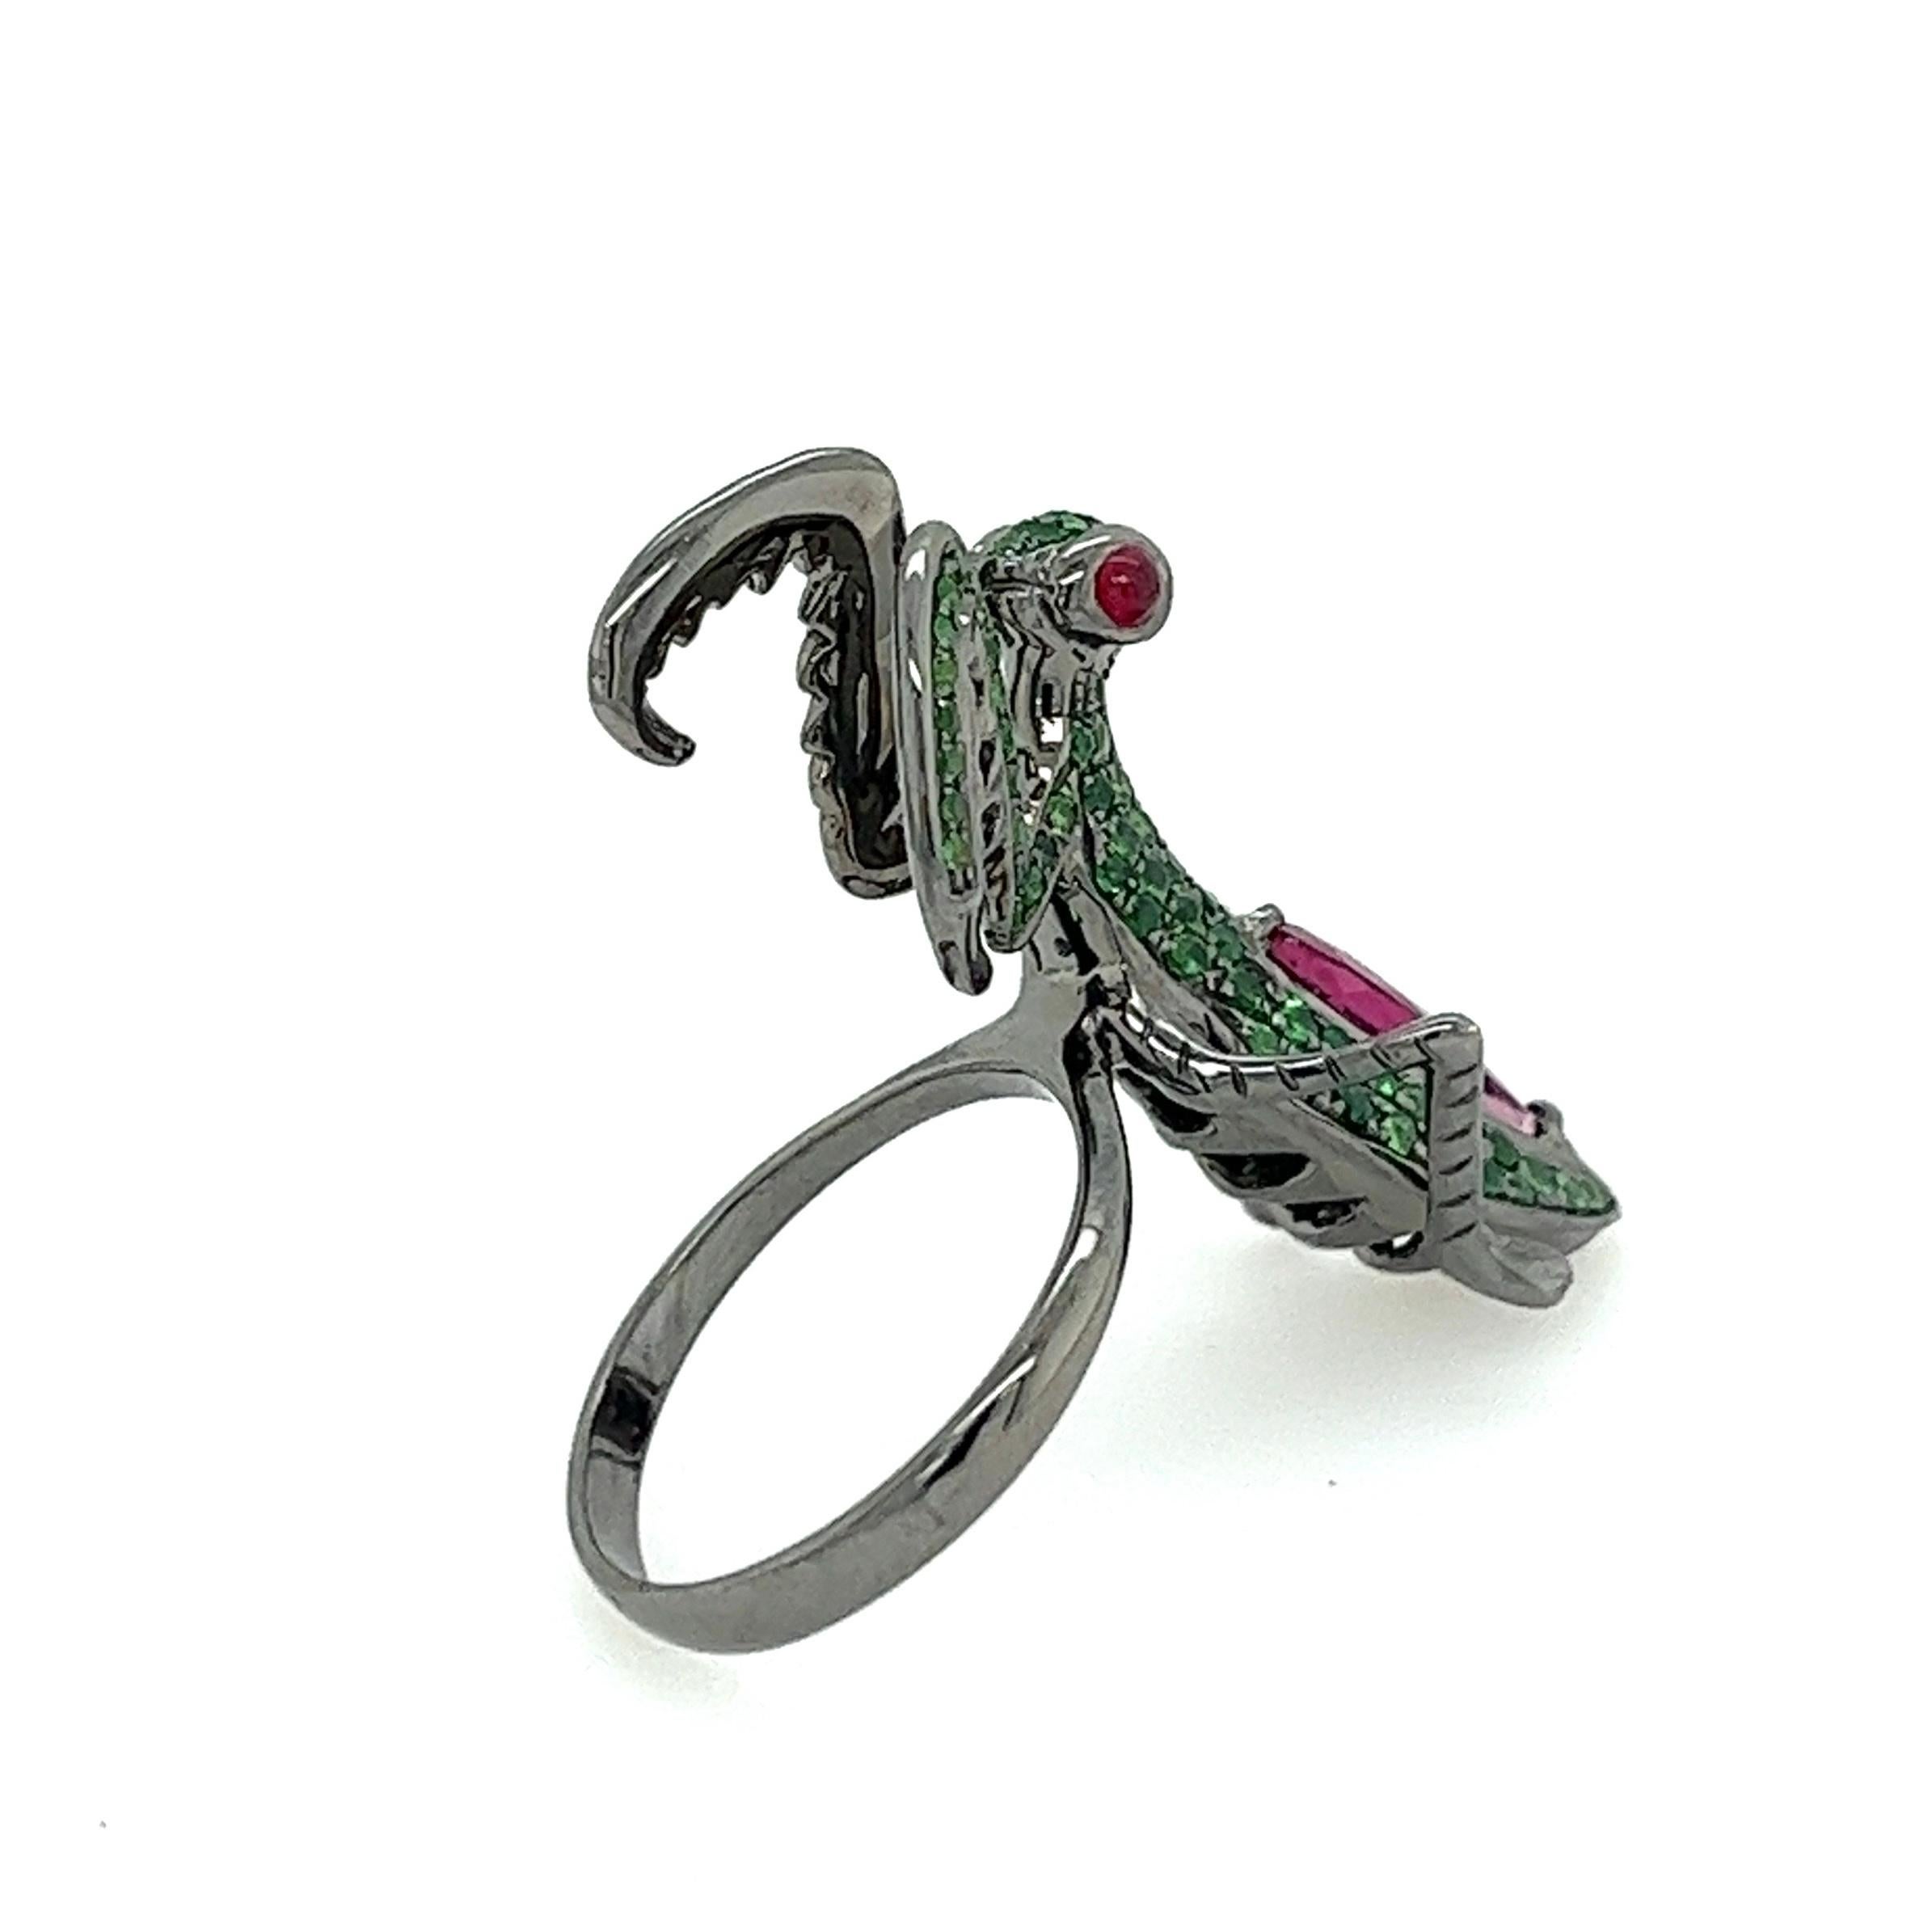 18K Rose Gold Tourmaline Mantis Ring with Rubies & Green Garnets

110 Green Garnets - 1.15 CT
2 Rubies - 0.17 CT
1 Tourmaline - 1.27 CT
18K Rose Gold - 9.69 GM

This piece is not only a beautiful piece of jewelry but also a symbol of strength and